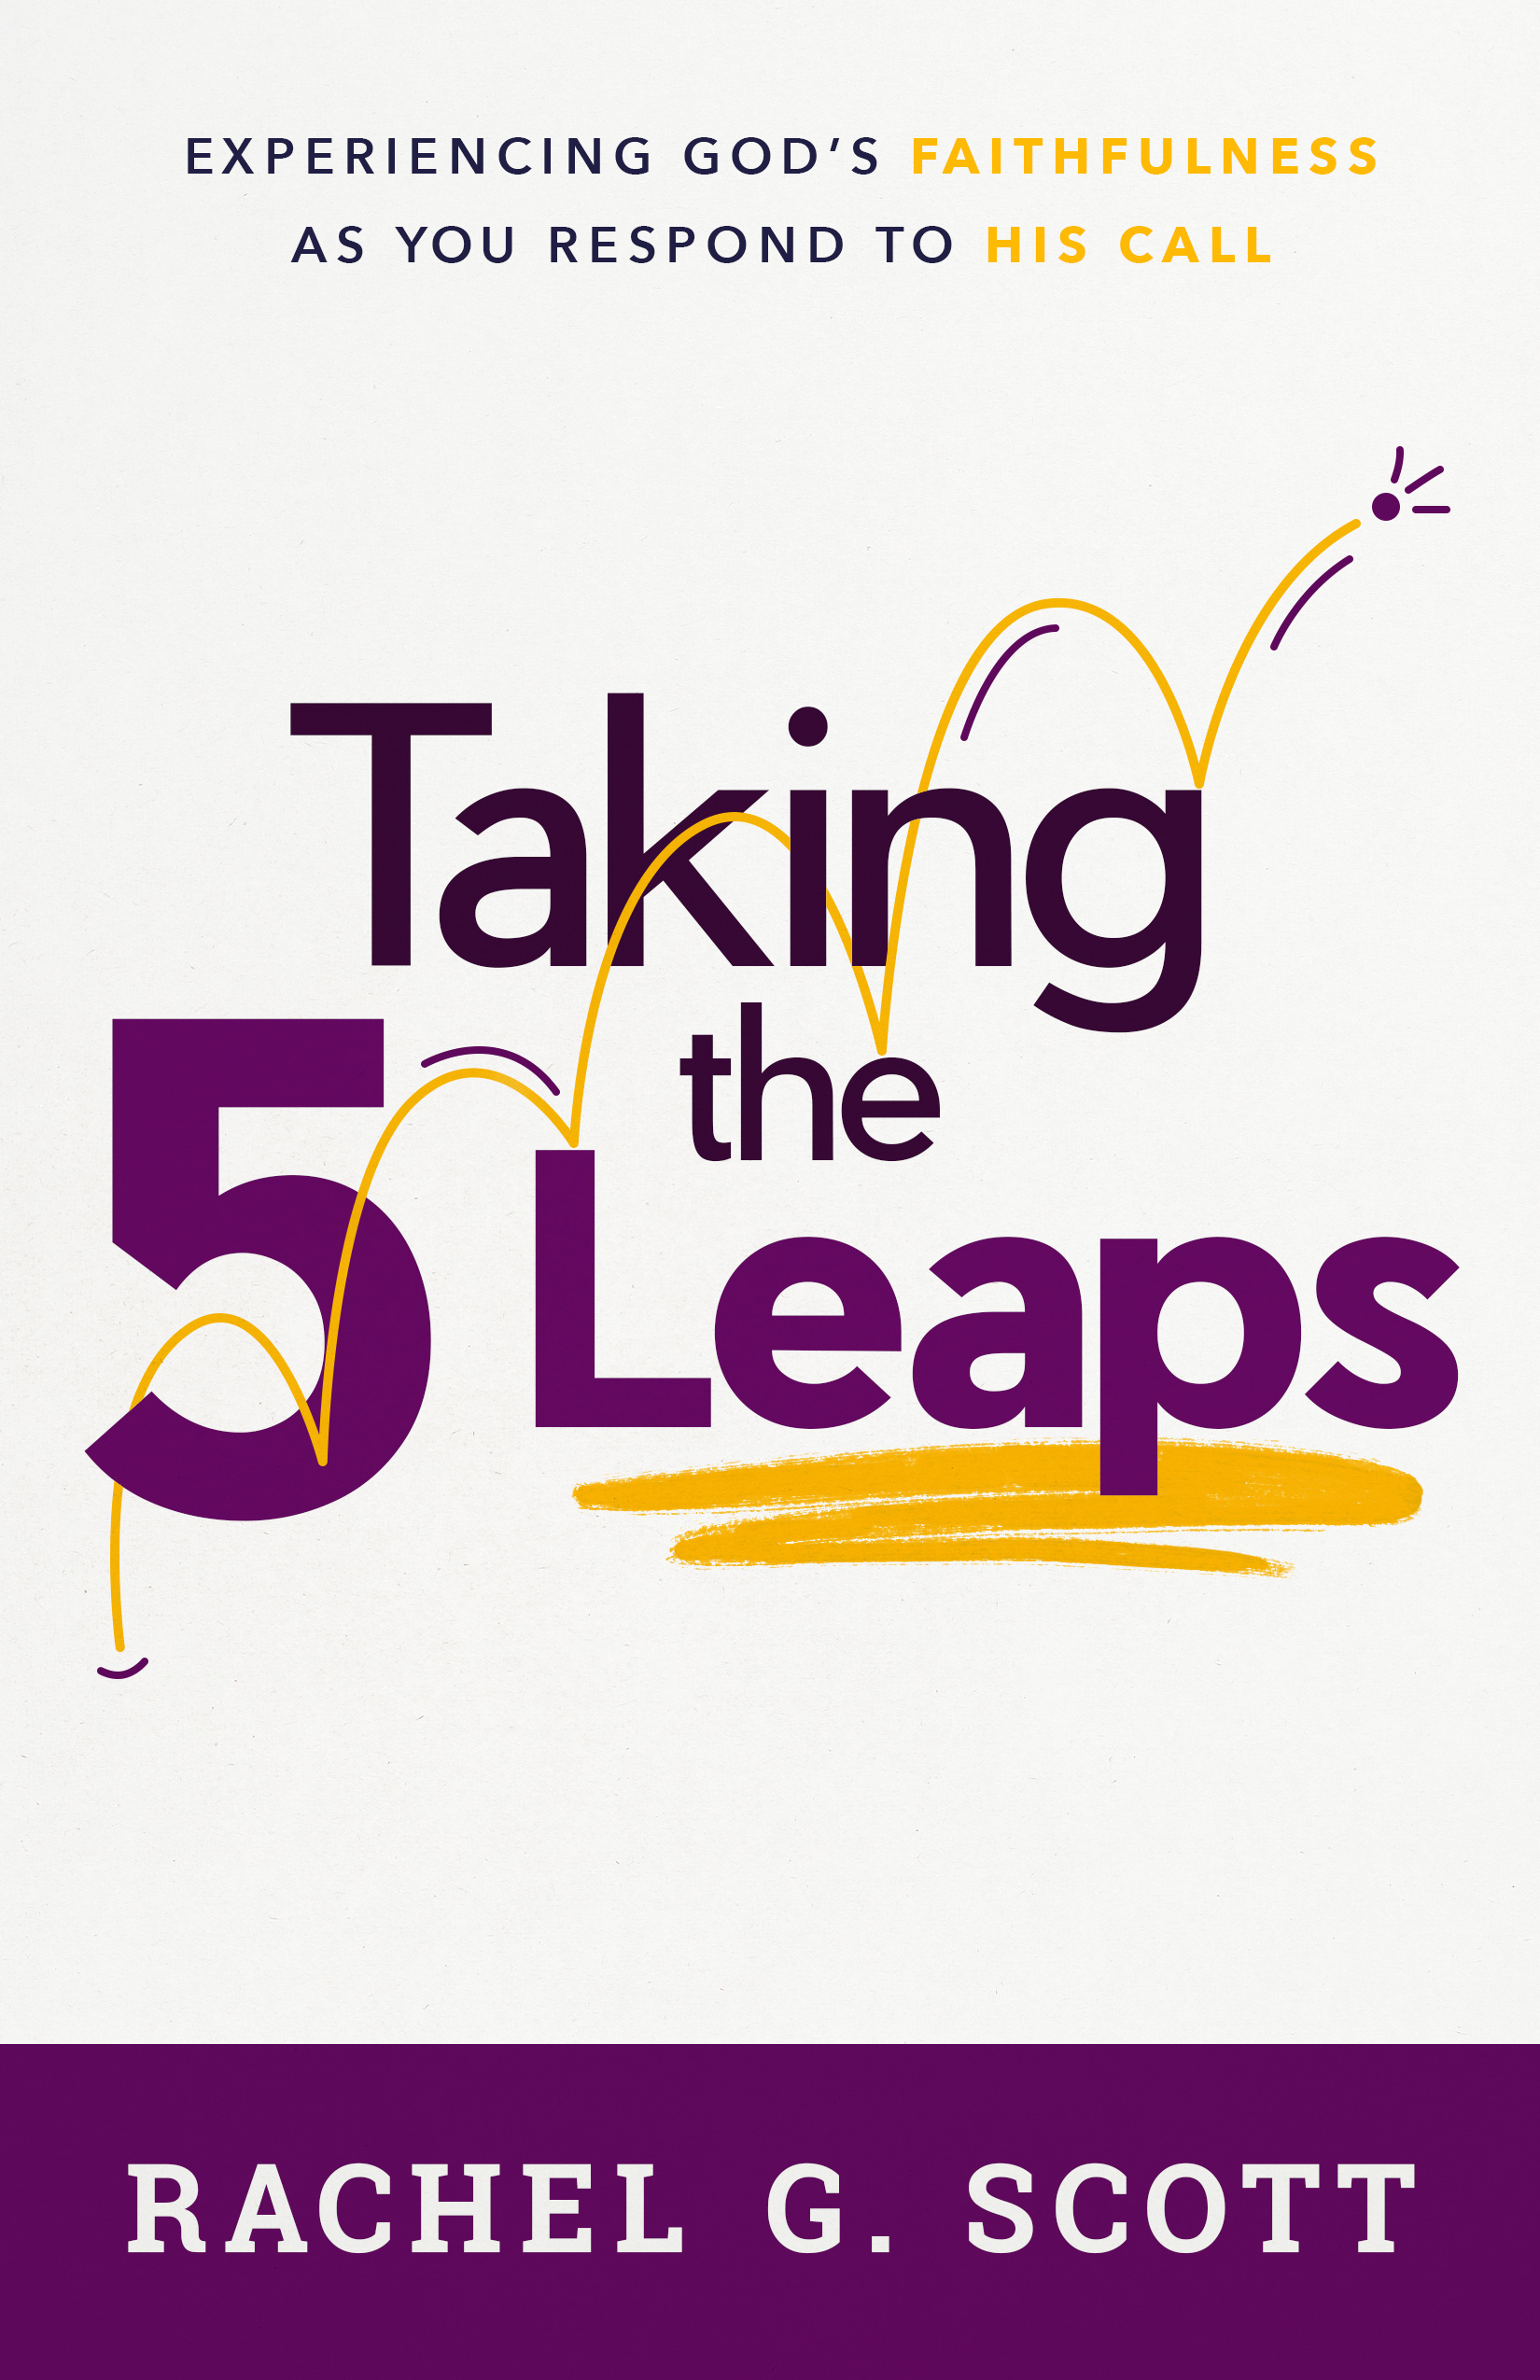 Order My Book “Taking the 5 Leaps” Book thumbnail